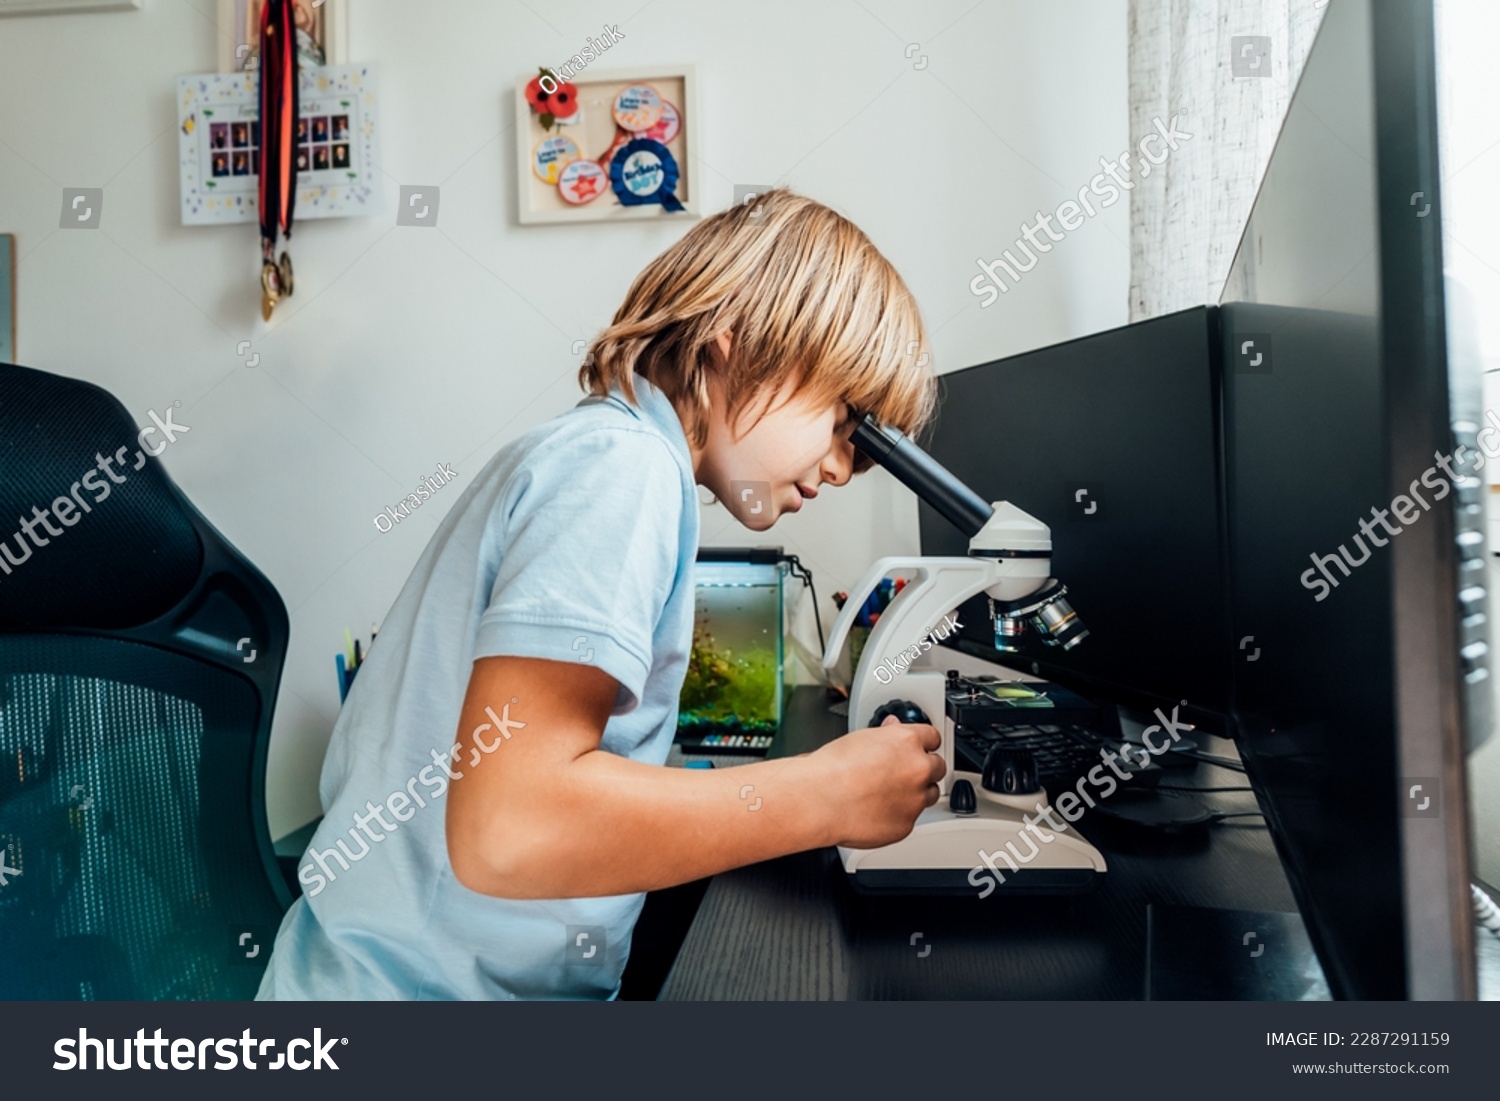 Caucasian boy using a microscope at home at his study place. Child curiosity, thirst for knowledge, home learning experience, home remote education concepts. Selective focus. #2287291159